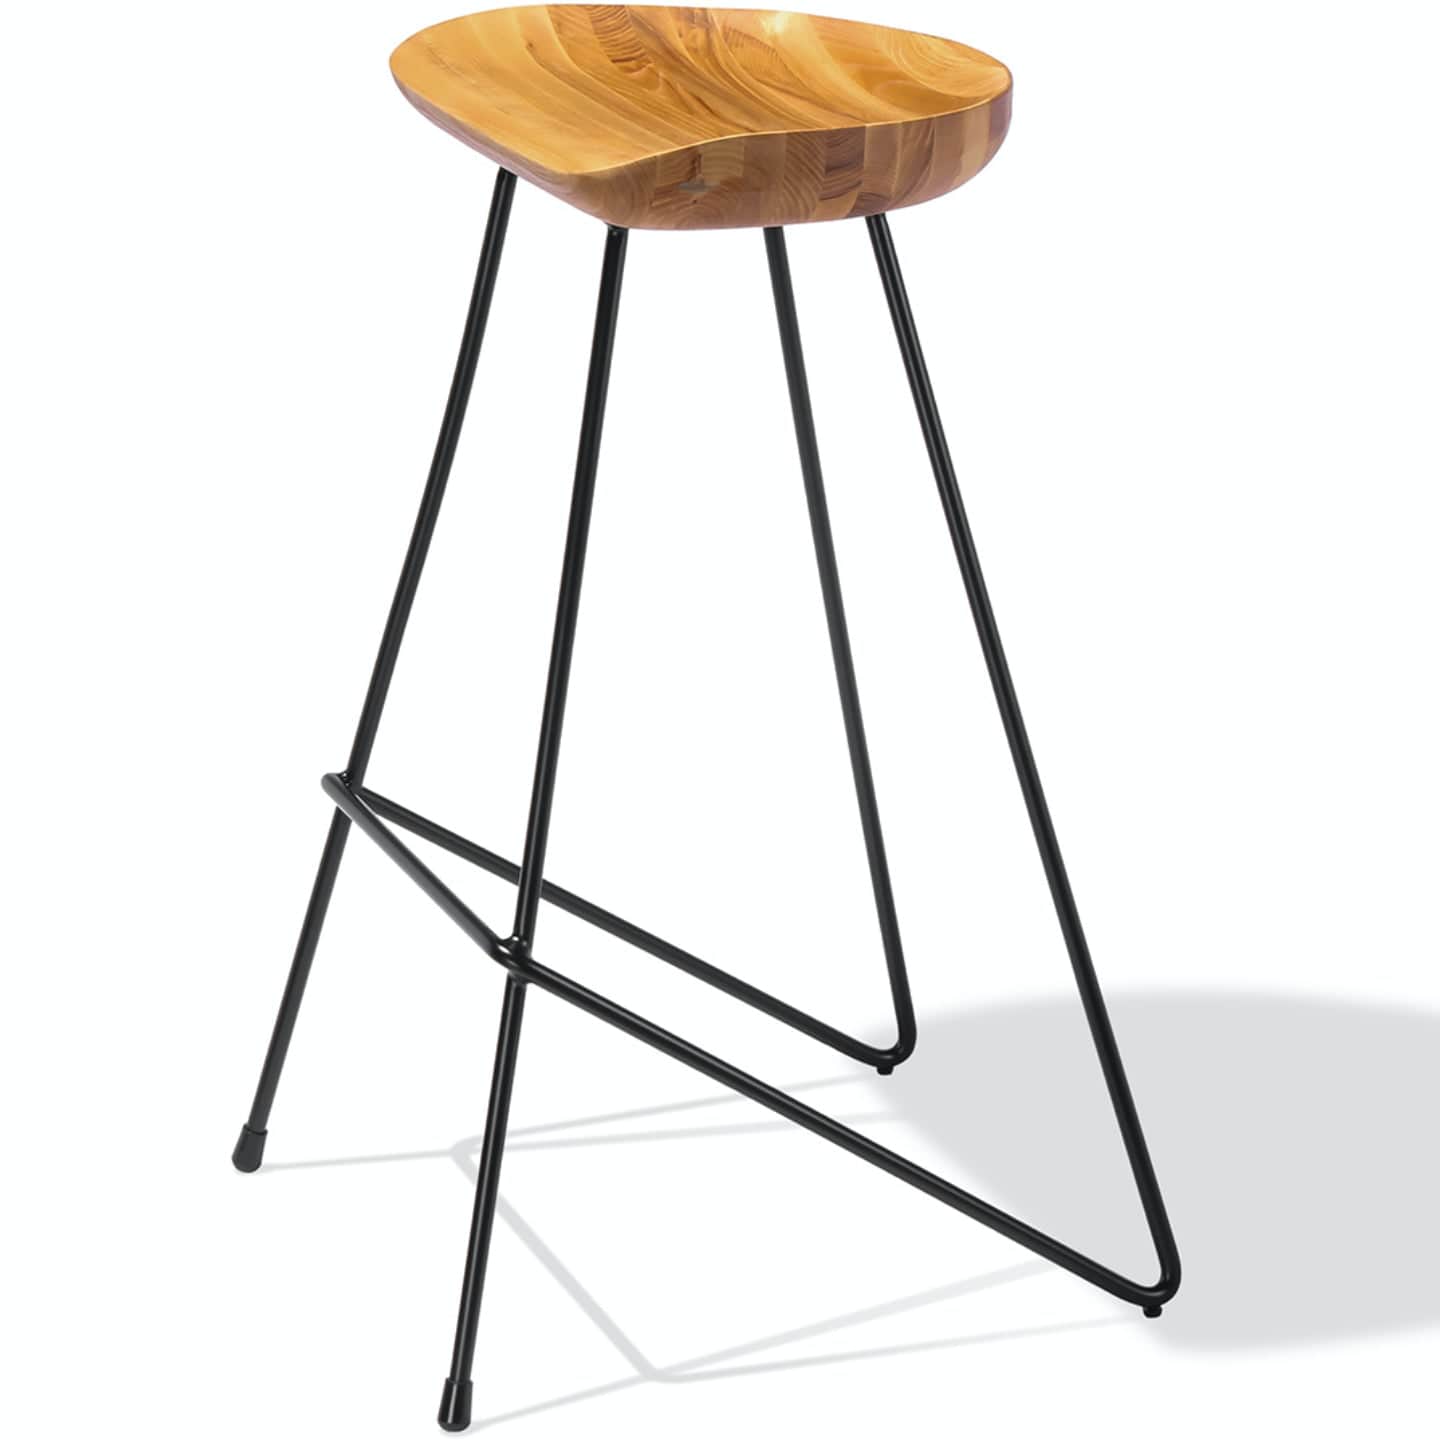 Soho Concept cattelan-industrial-black-metal-wire-base-wood-seat-kitchen-counter-stool-in-natural